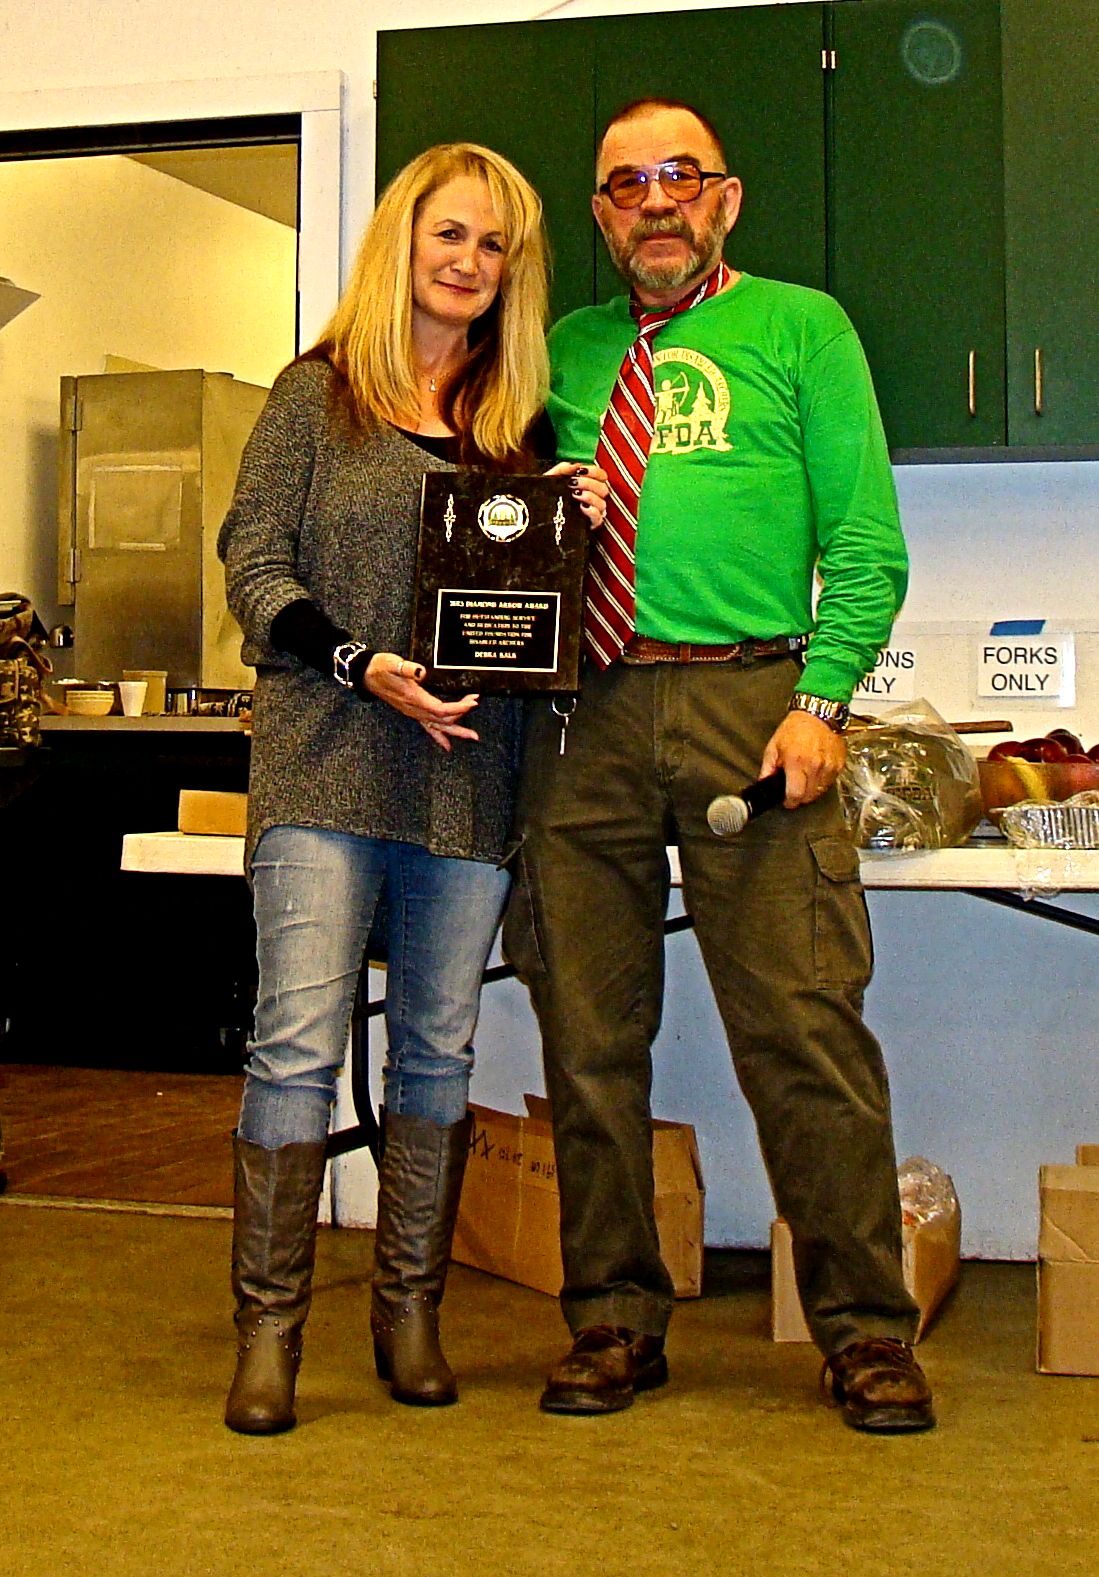 UFFDA President Daniel Hendricks presents Deb Kalk with the Diamond Arrow Award for outstanding service, awarded for only the second time in UFFDA history.